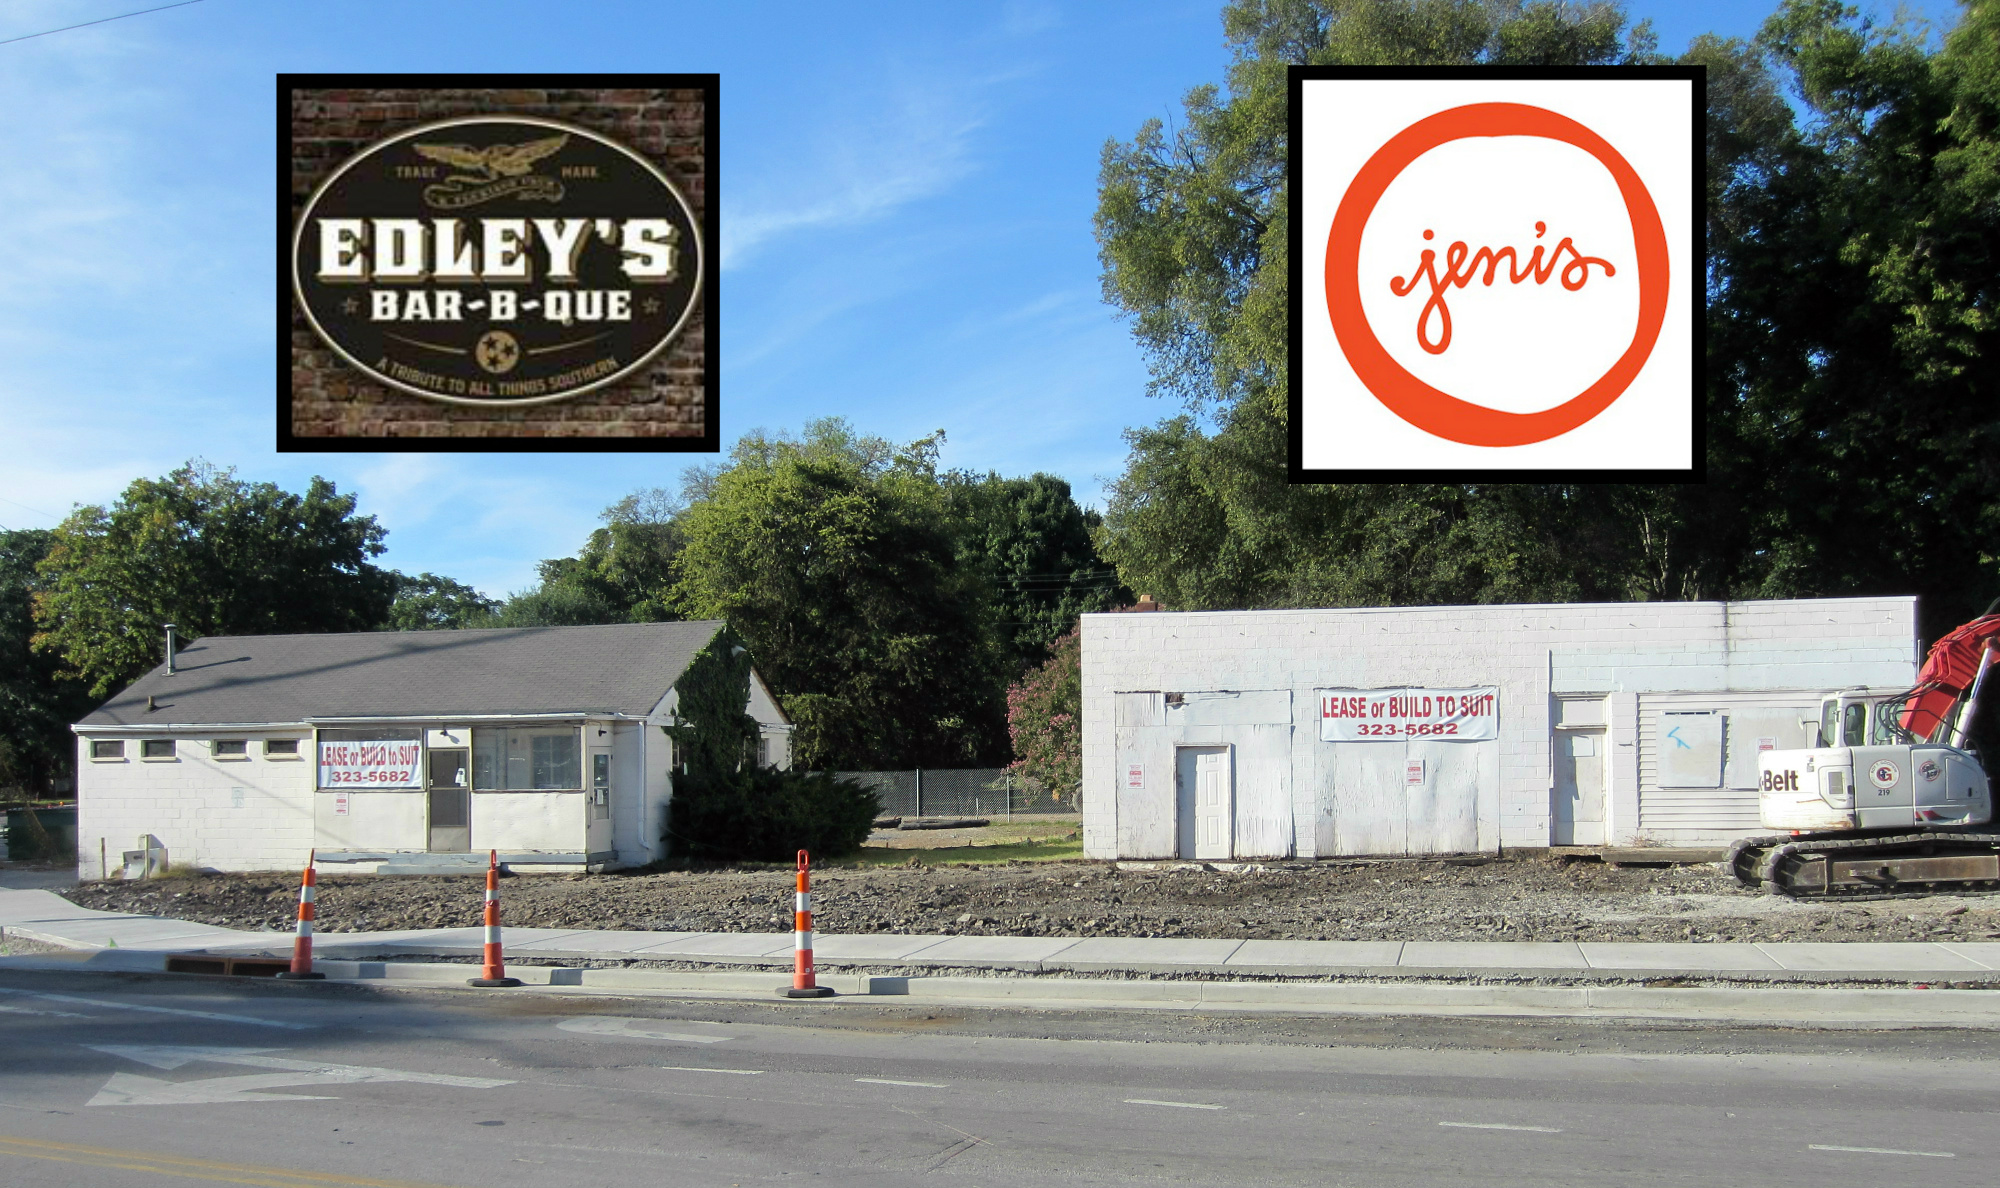 The former home of the Sylvan Park Restaurant and the likely future home of Edley's Bar-B-Que and Jeni's Ice Creams.